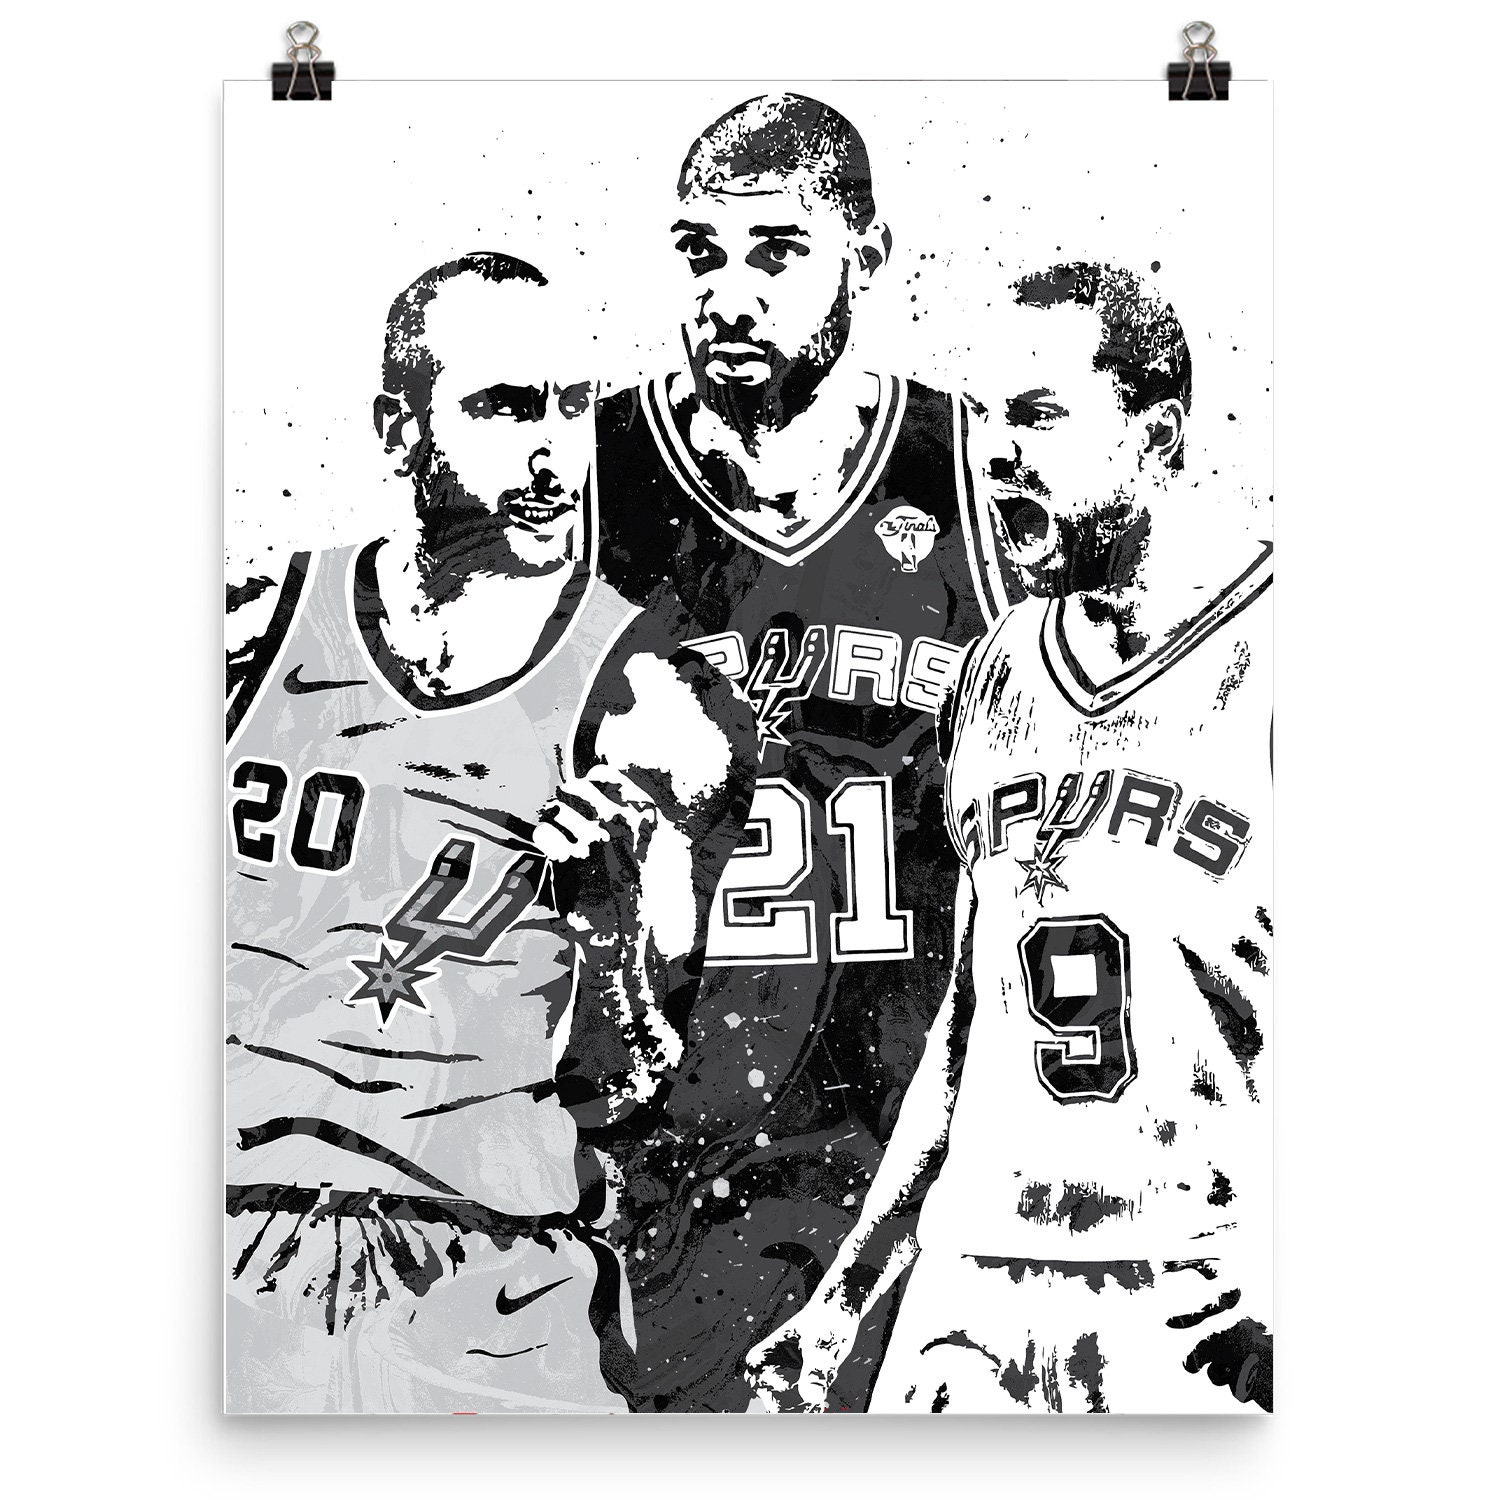 Sports Illustrated regional cover features Spurs' Tim Duncan, Tony Parker, Manu  Ginobili - Sports Illustrated